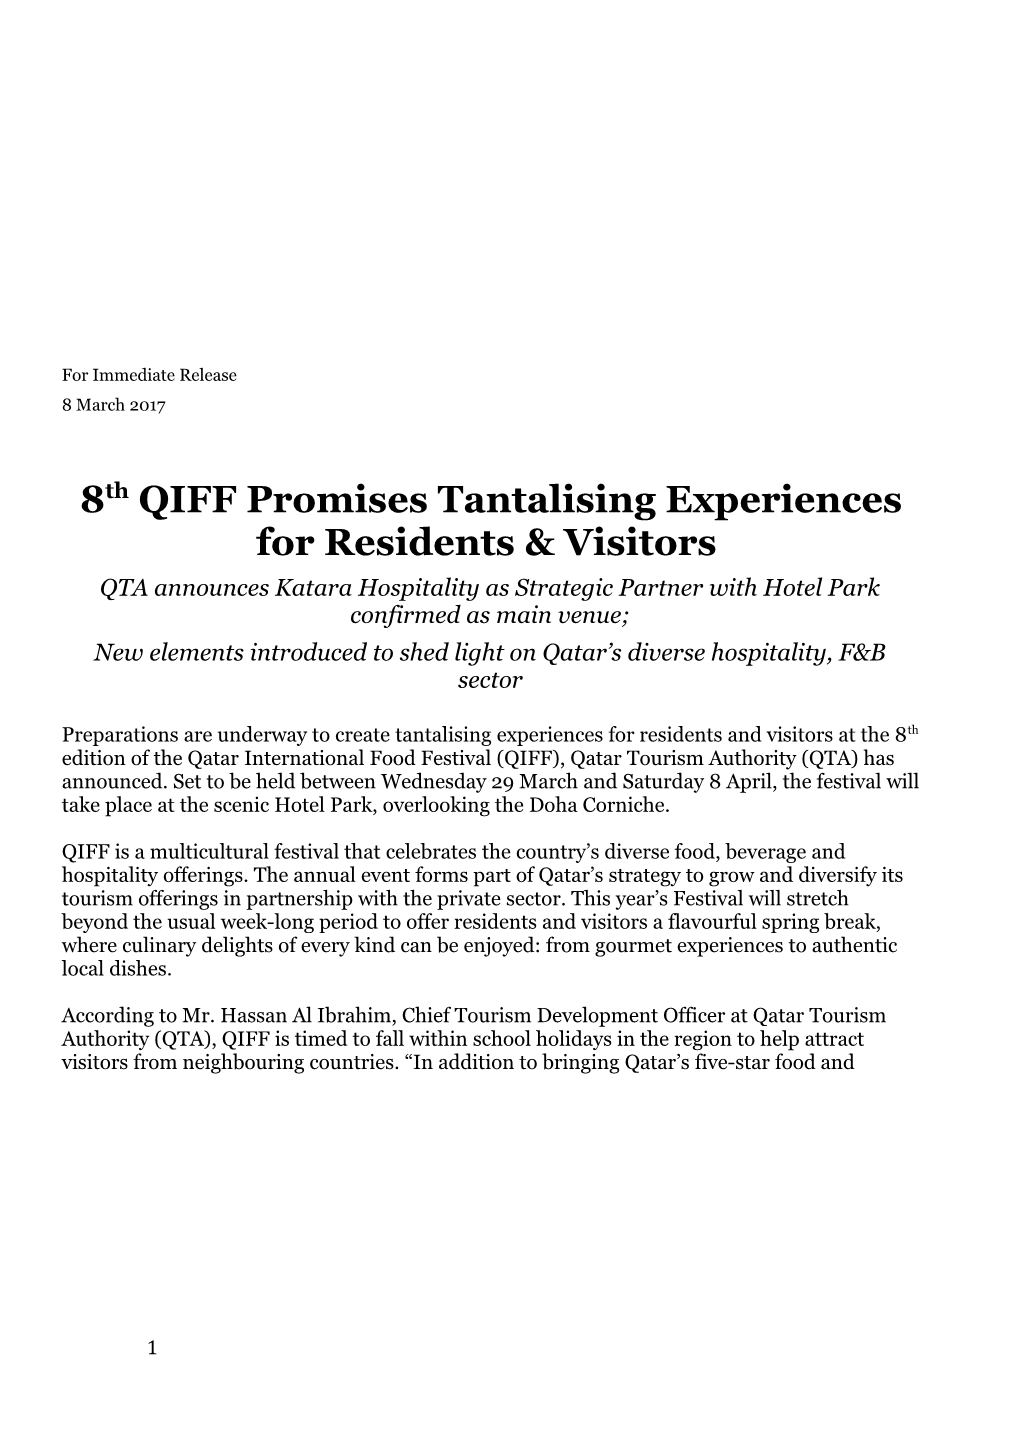 8Th QIFF Promises Tantalising Experiences for Residents & Visitors